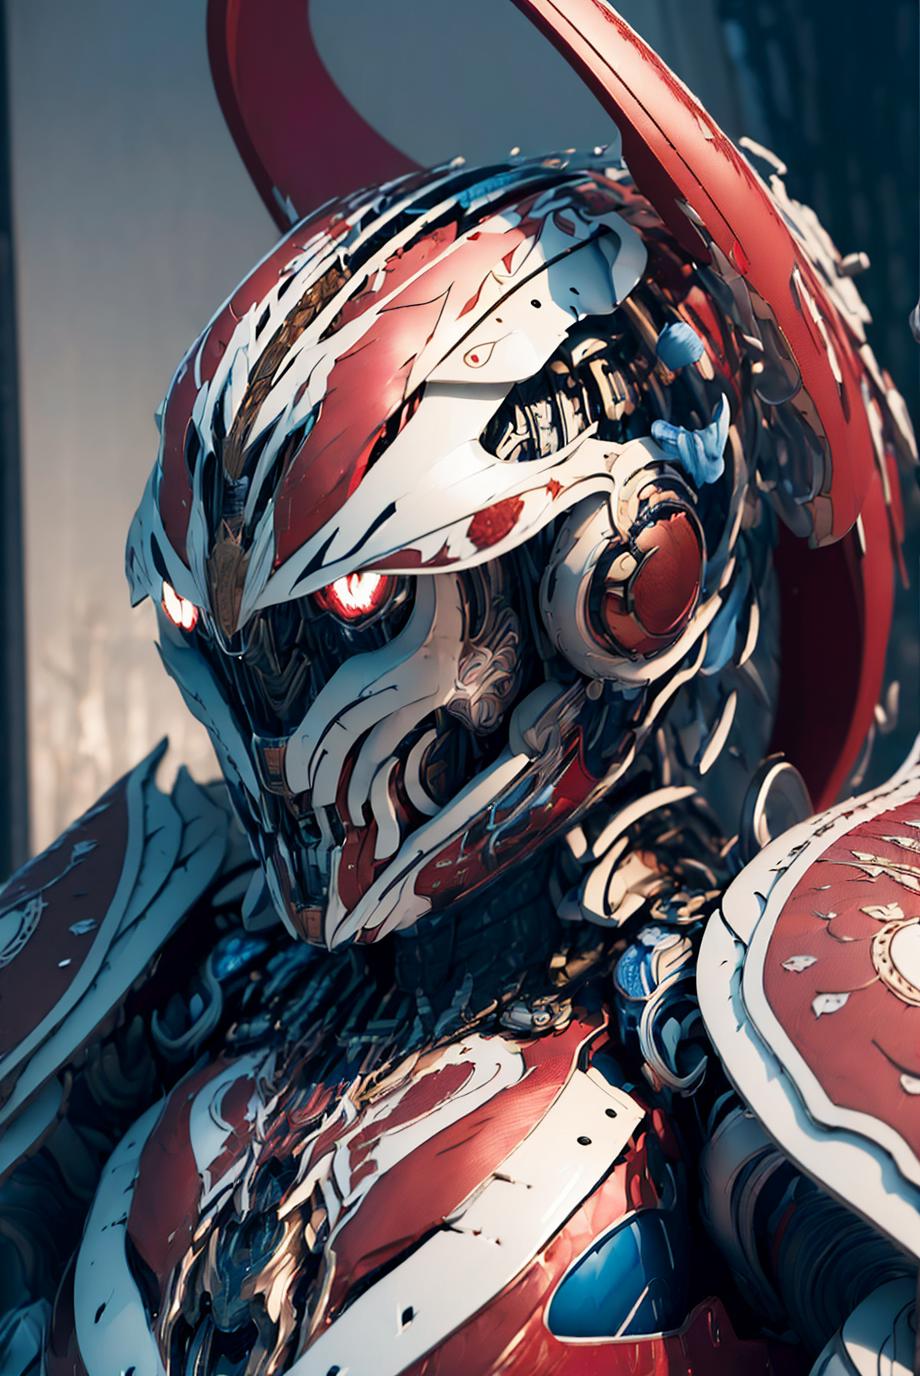 A close-up of a robot head with a red and white color scheme and a clock on the shoulder.